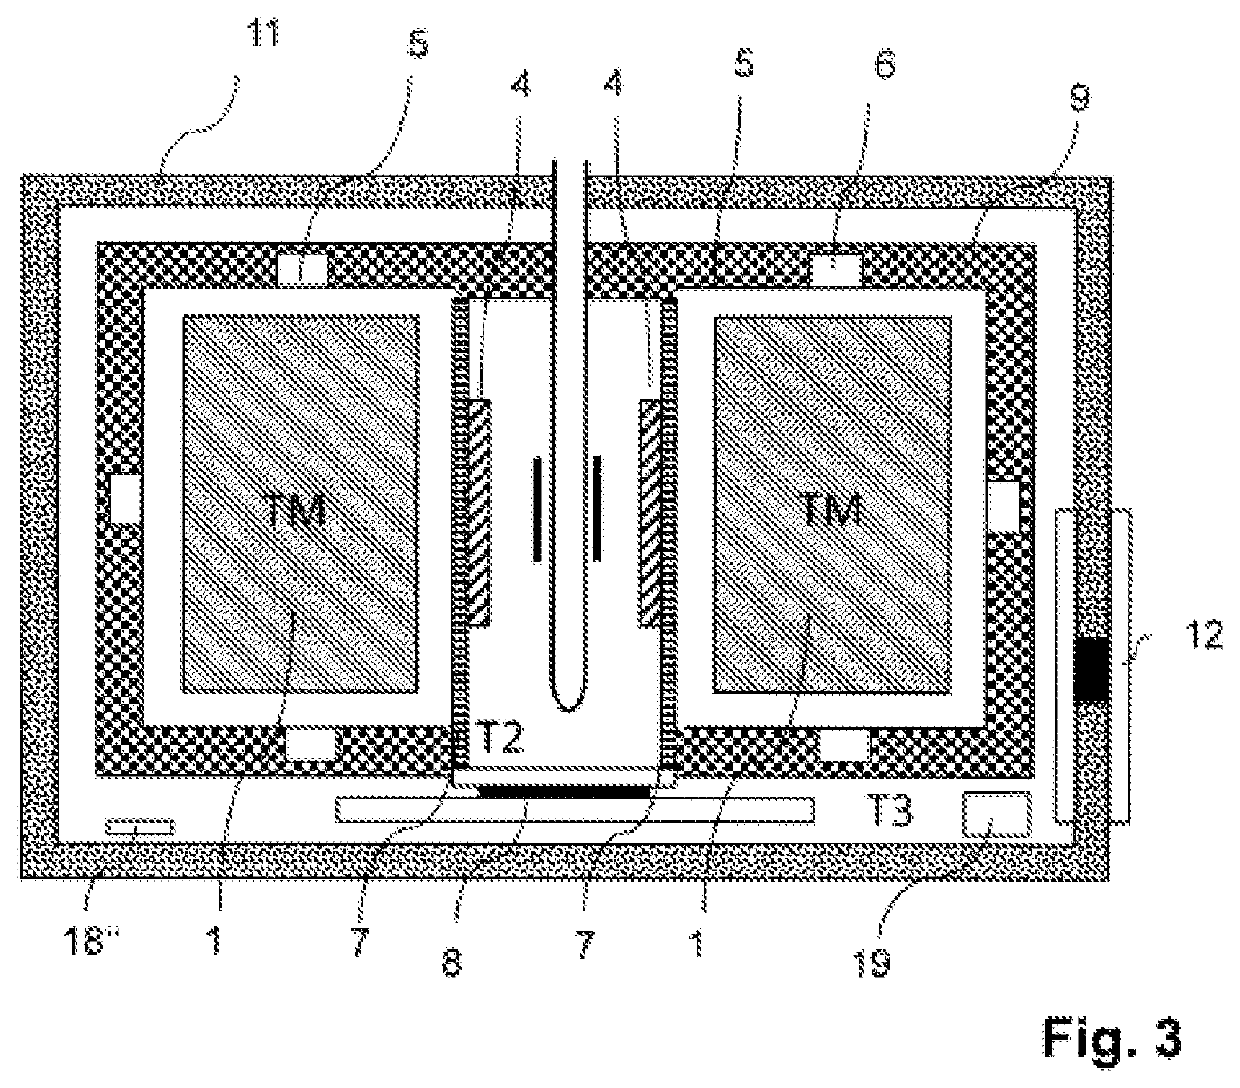 Temperature-control system for mr apparatuses with a permanent magnet arrangement